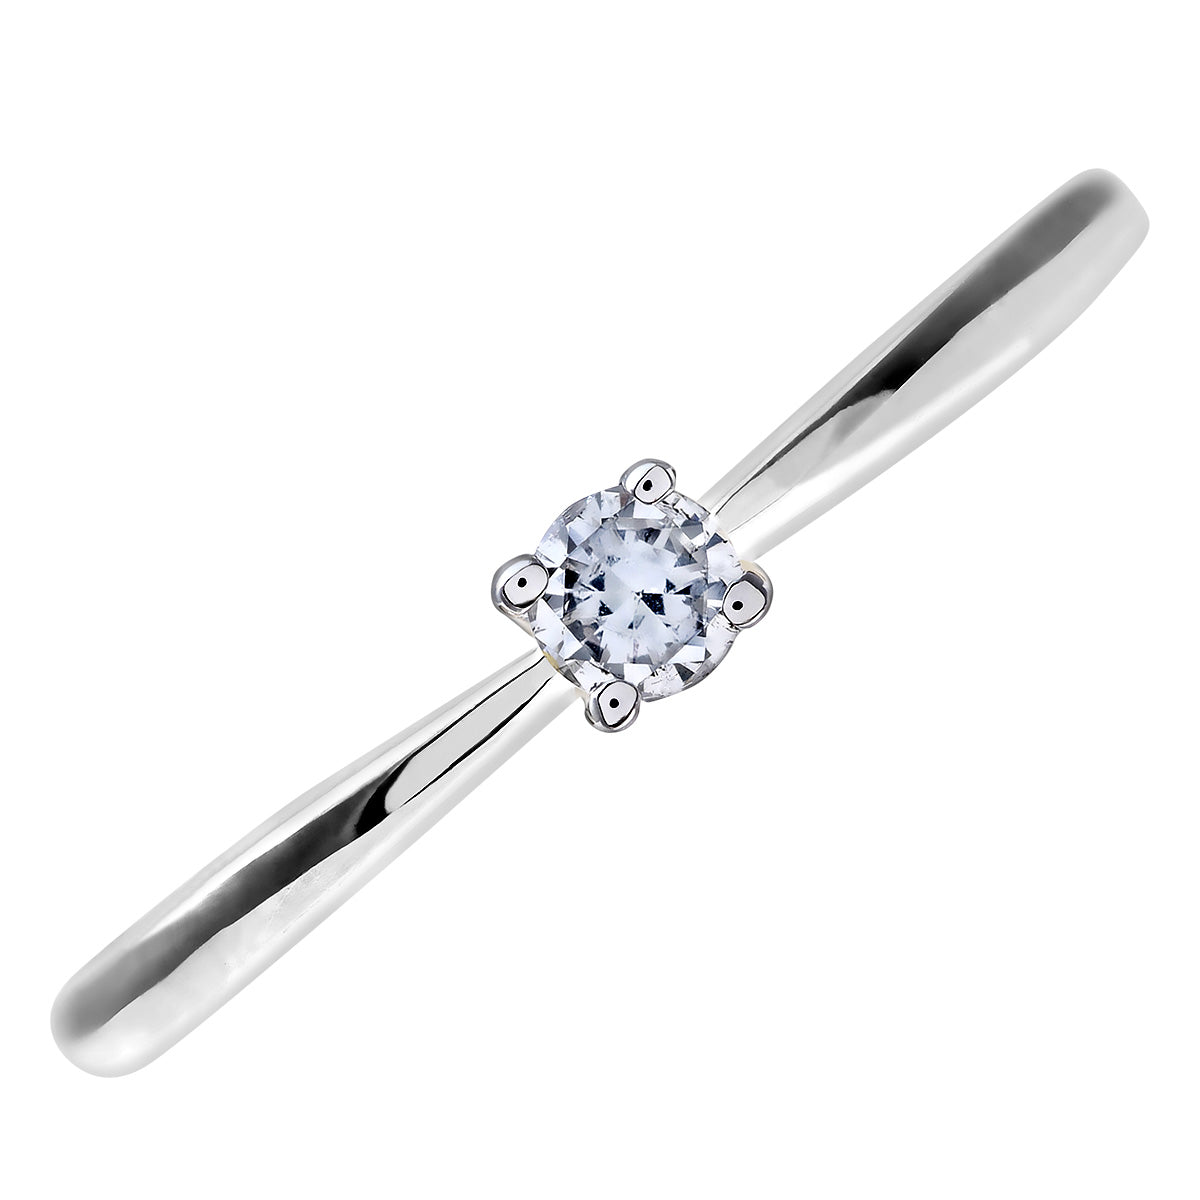 9ct White Gold  10pts Diamond 4 Claw Solitaire Engagement Ring - PR0AXL4304W9JPK